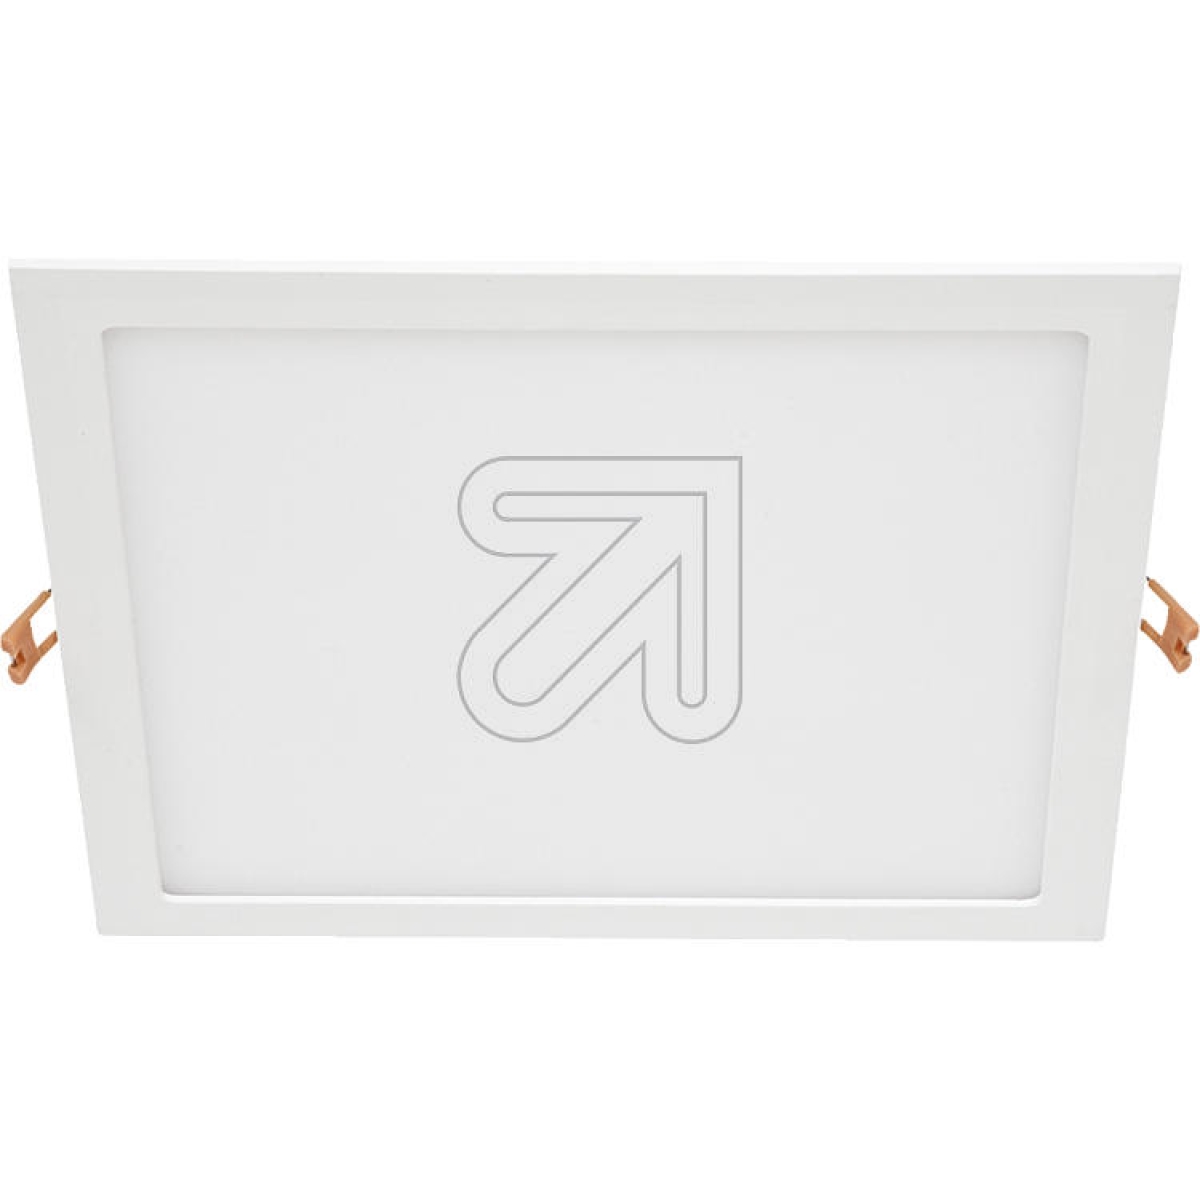 EVNLED recessed light 27W 3000K, white, square 350mA, beam angle 120°, dimmable, LPQW303502Article-No: 629485